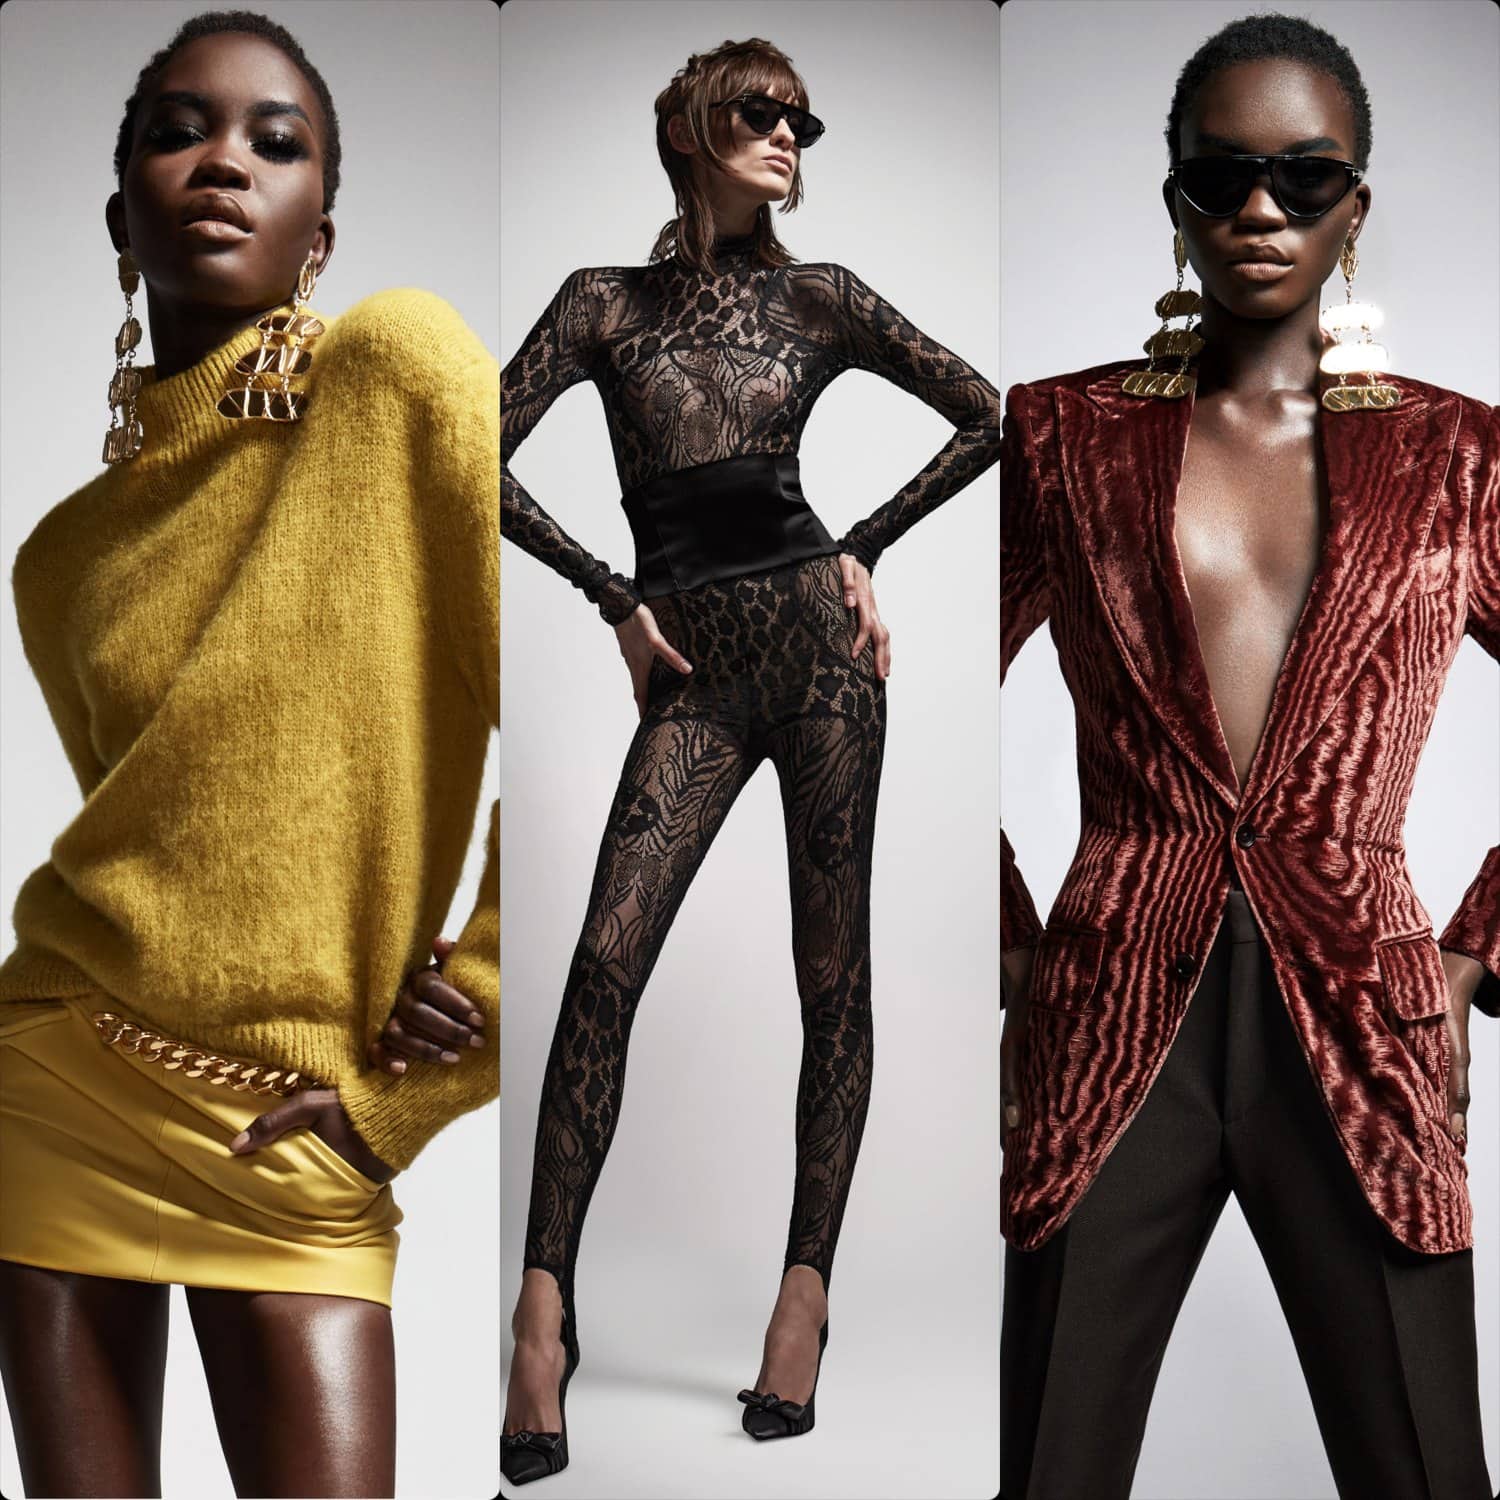 Tom Ford debuts Fall 2022 collections weeks after NYFW ends